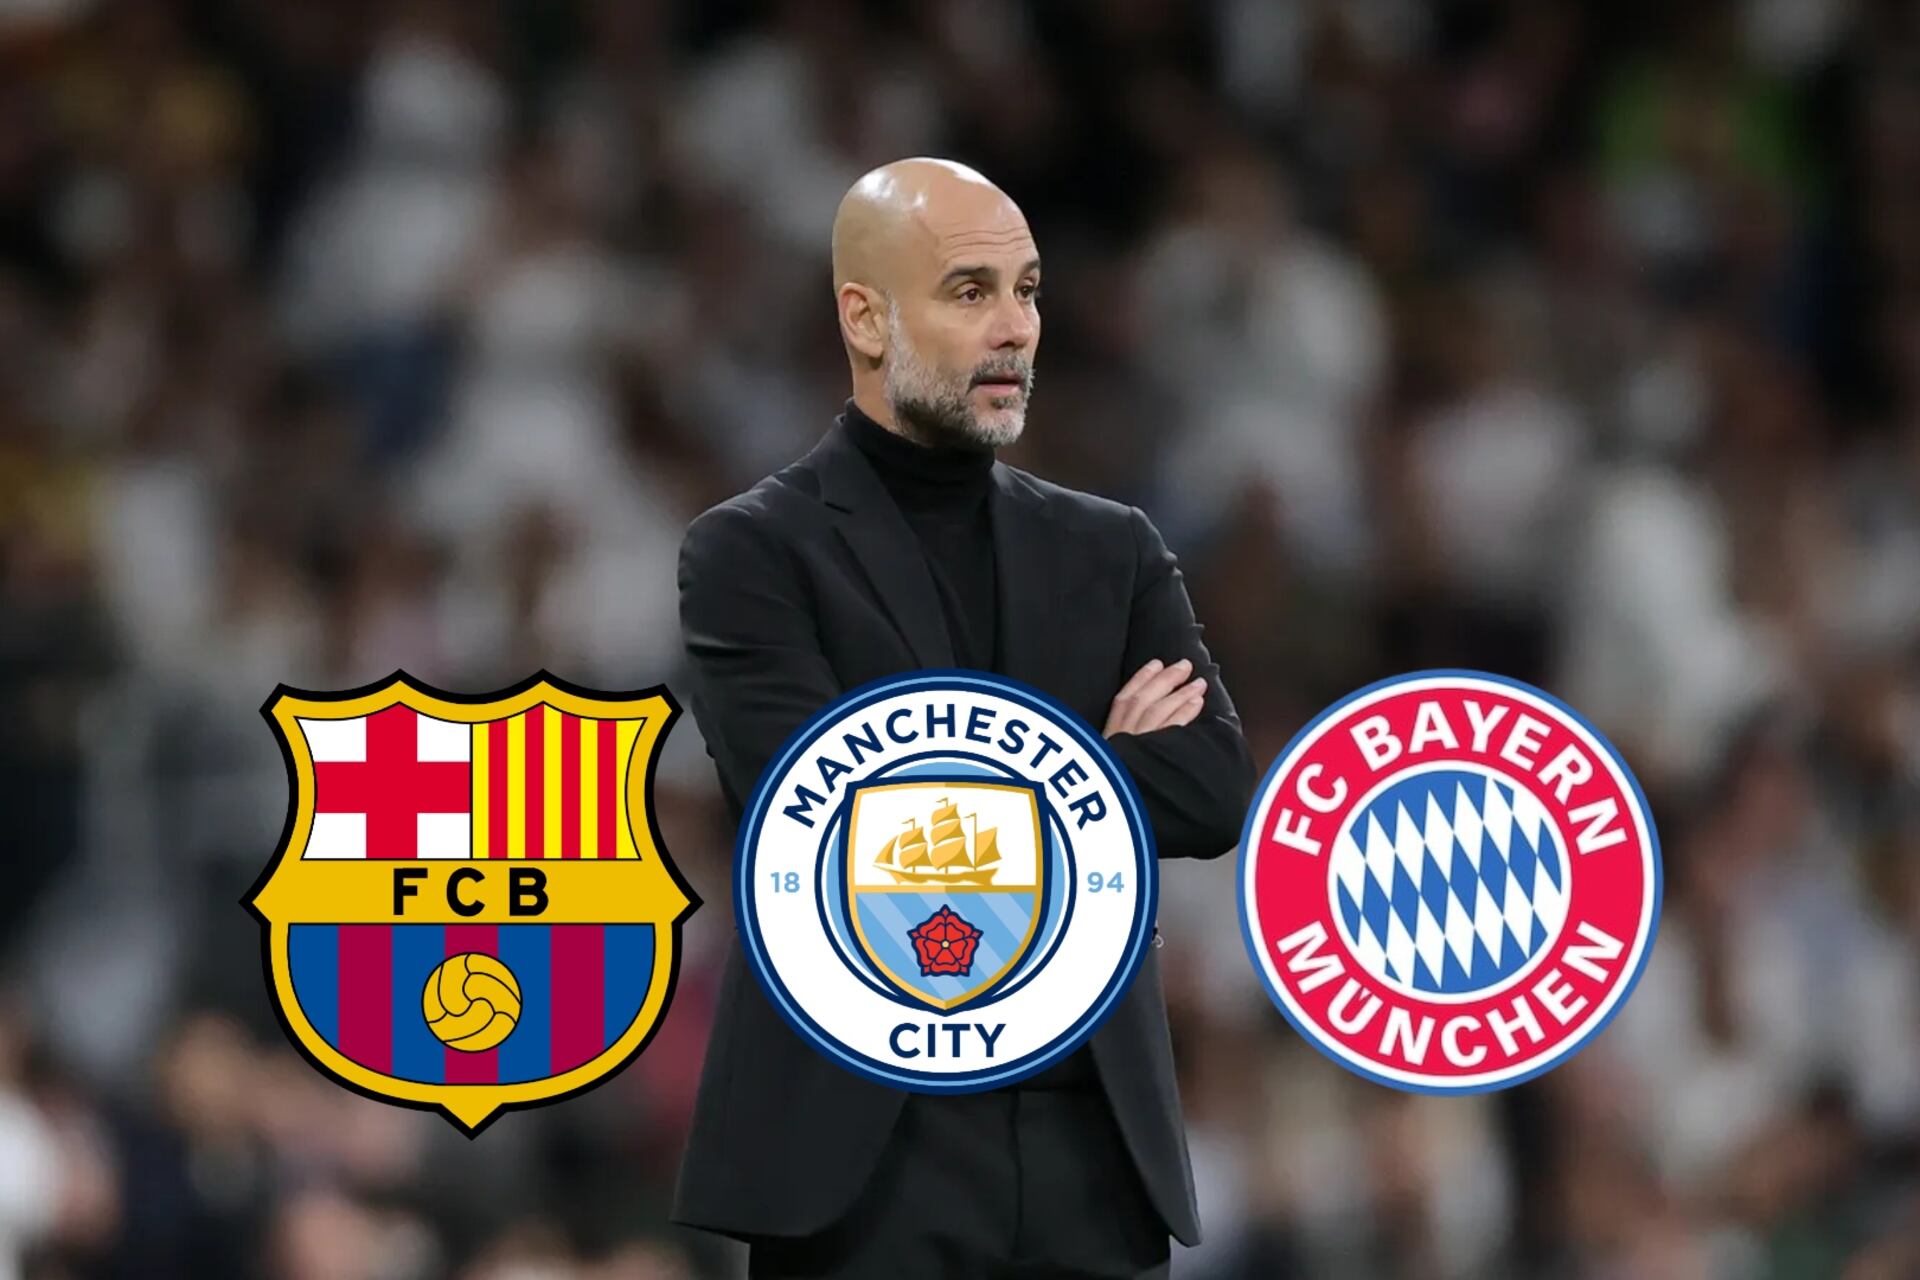 Guardiola's option he manages if he leaves Man City, he already coached them before and this would be his new salary